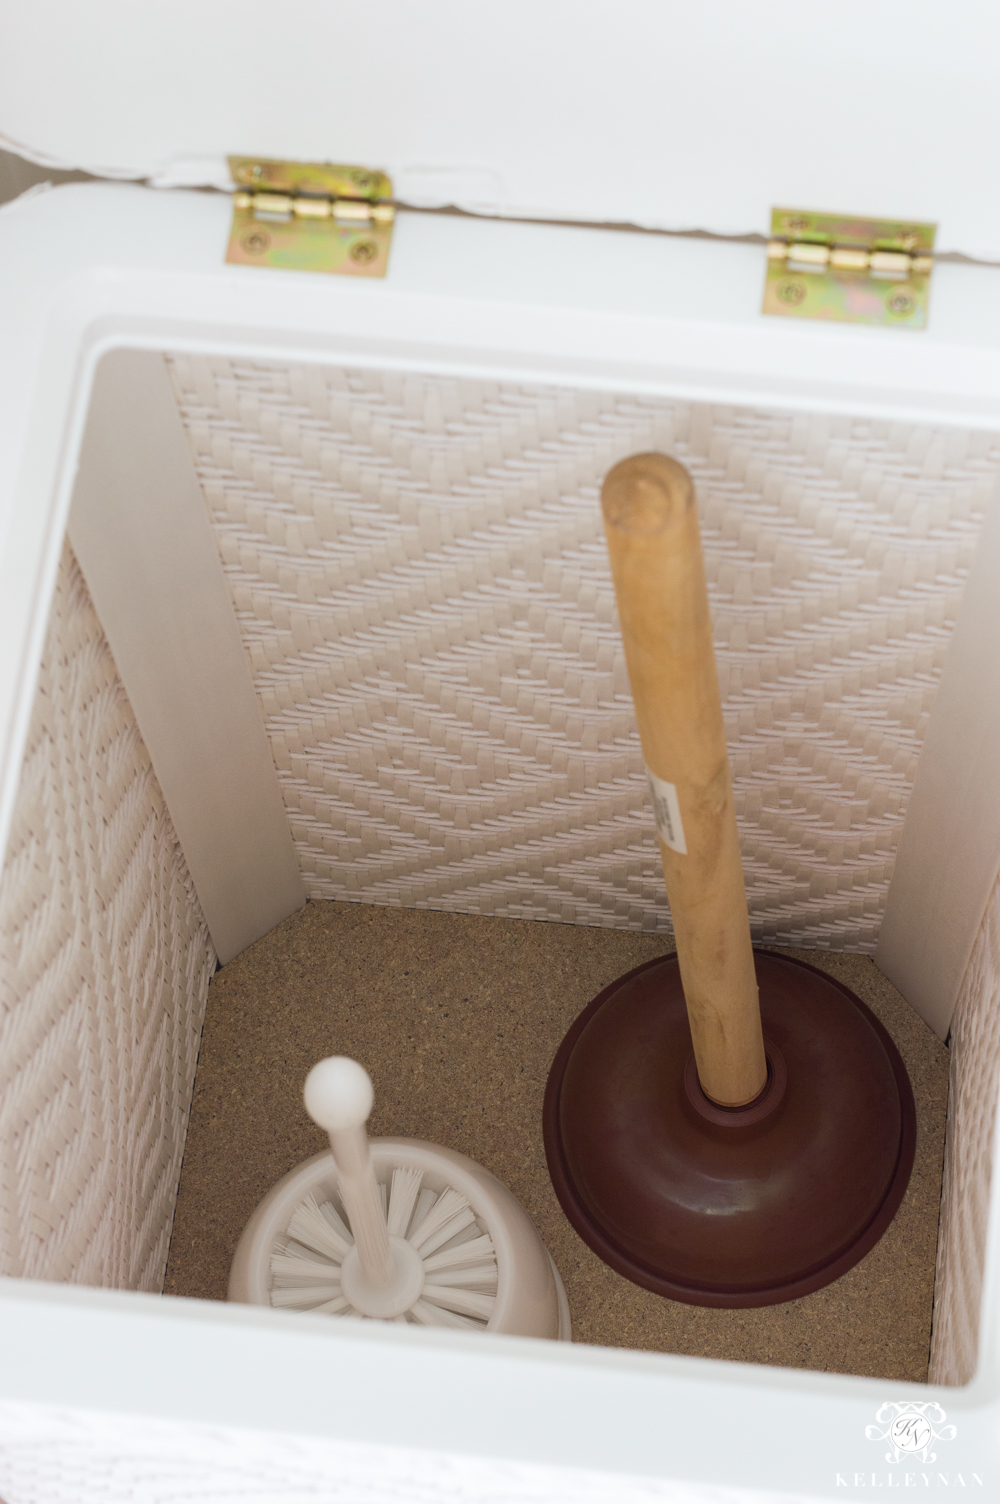 Using a hamper as a clever storage solution for bathroom plunger and toilet brush